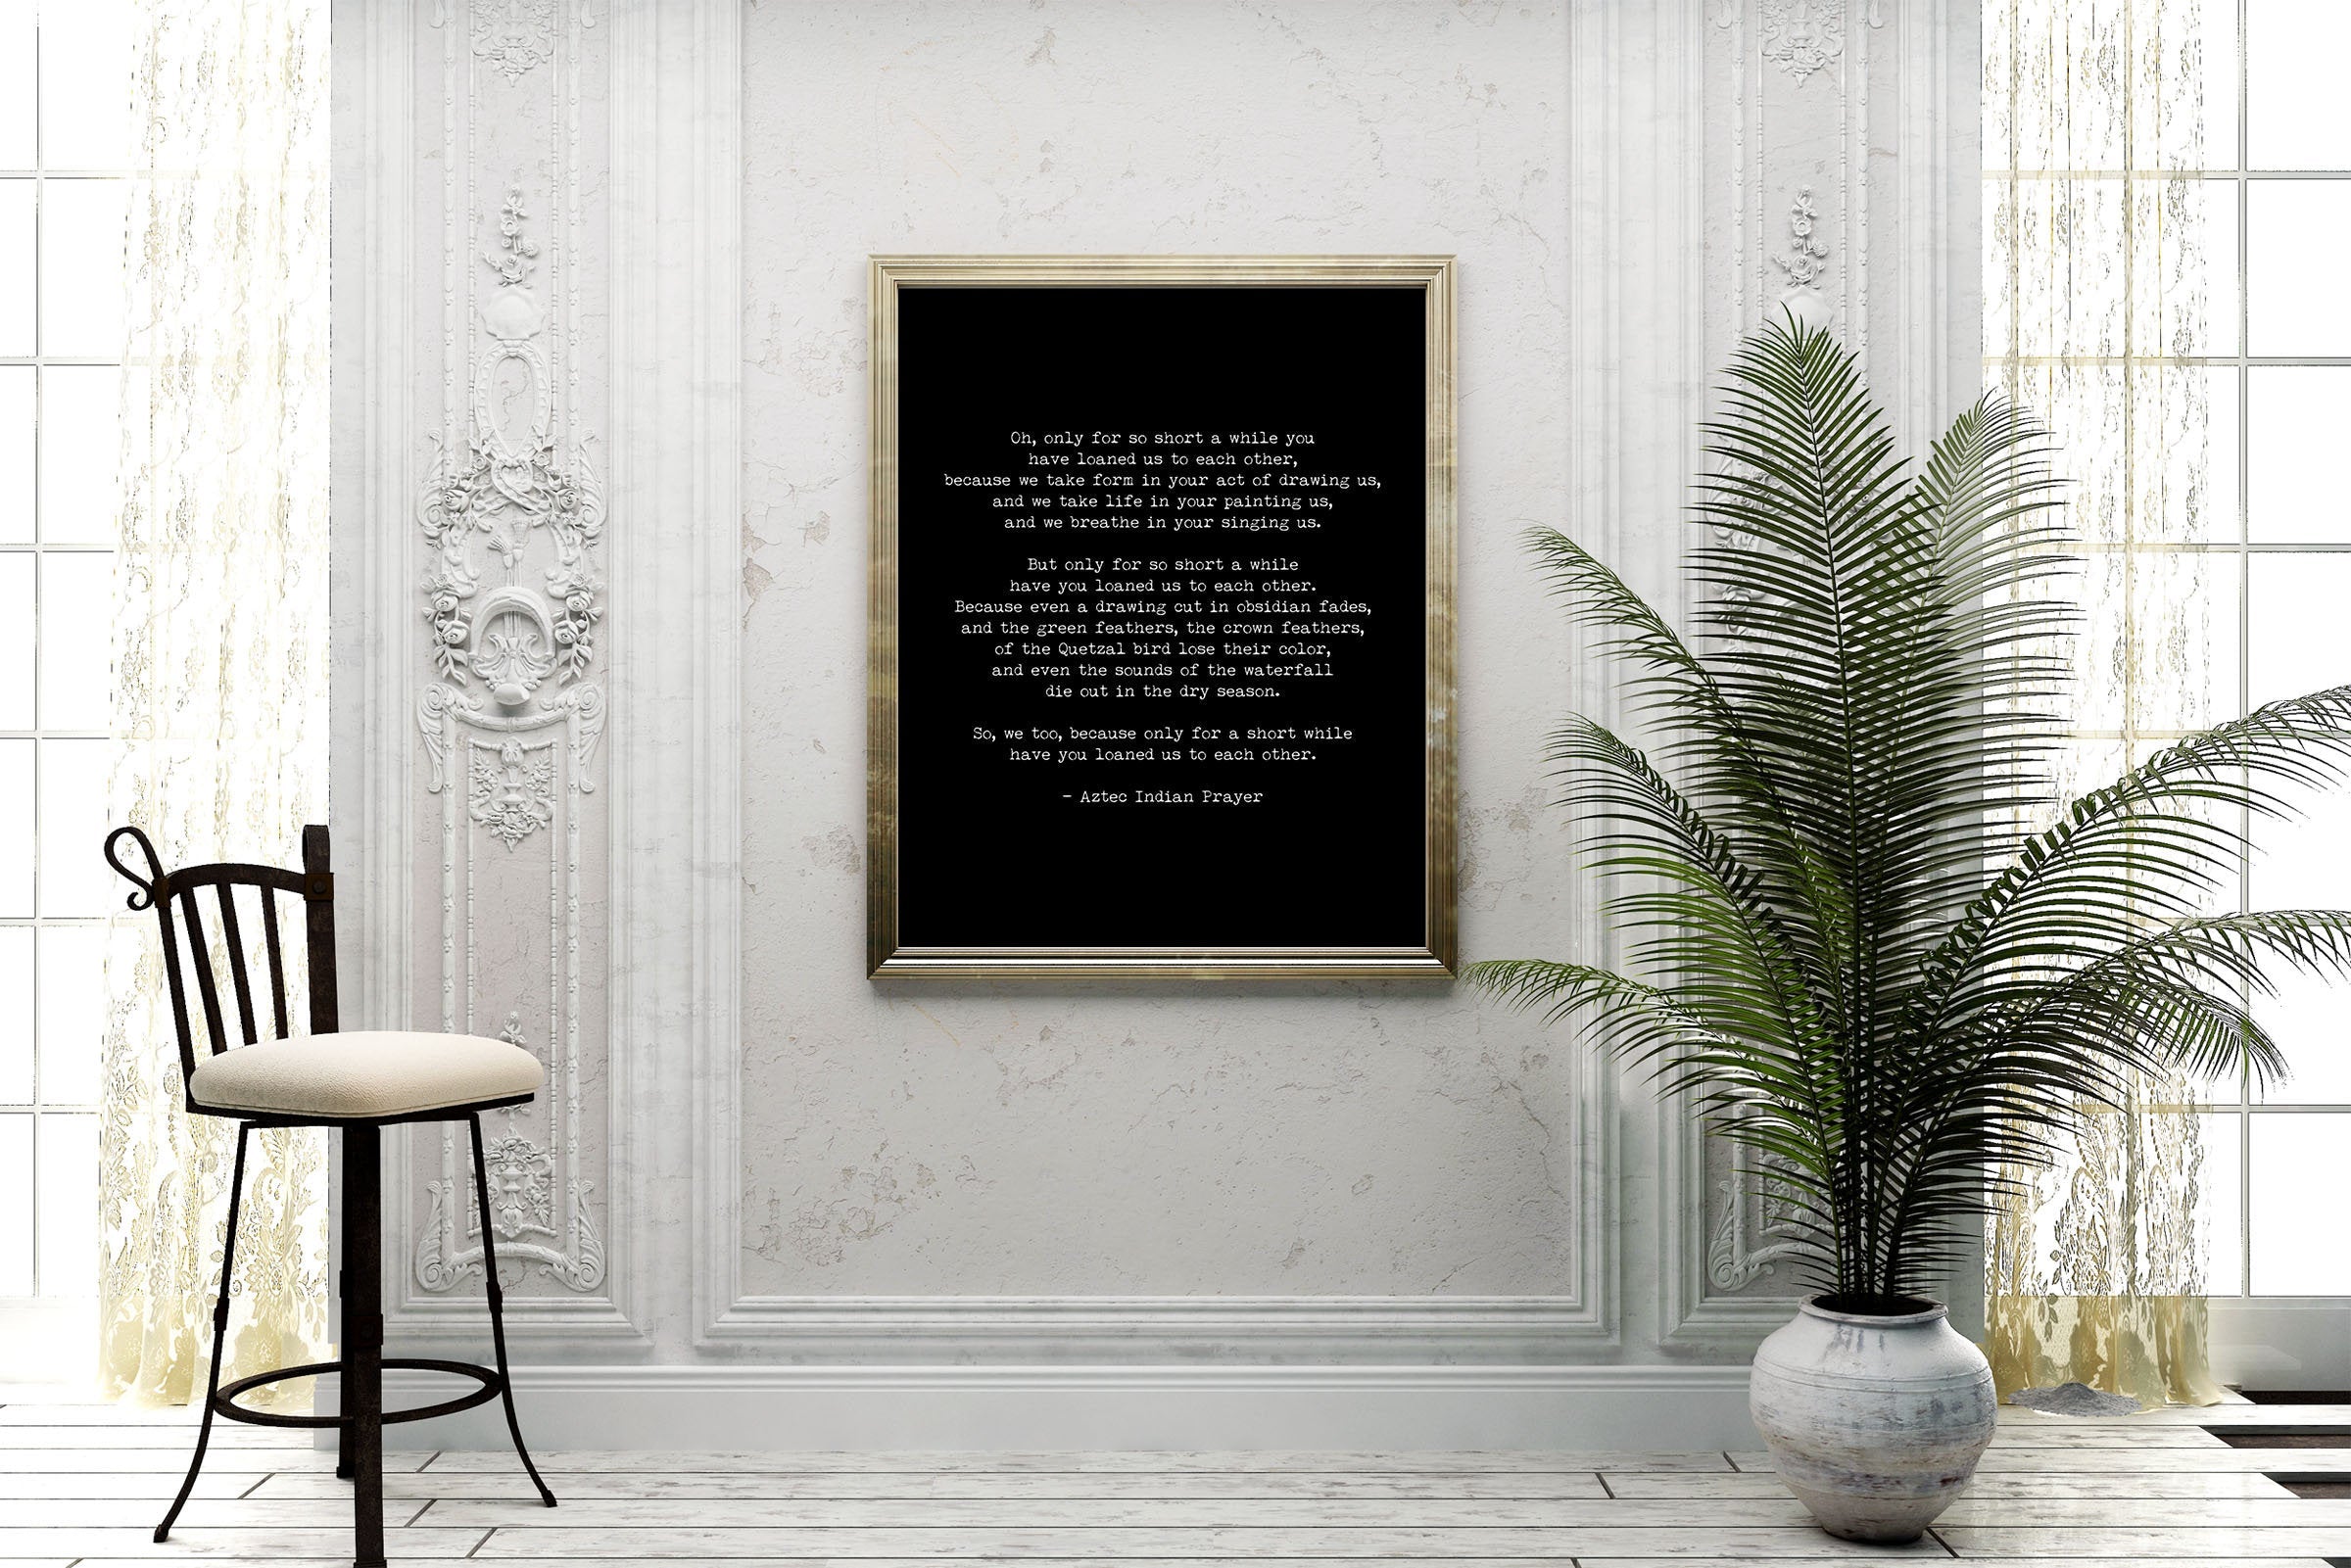 Native American Aztec Prayer Quote Print in Black & White, Oh Only For So Short A While Inspirational Gift Wall Art Print Unframed - BookQuoteDecor